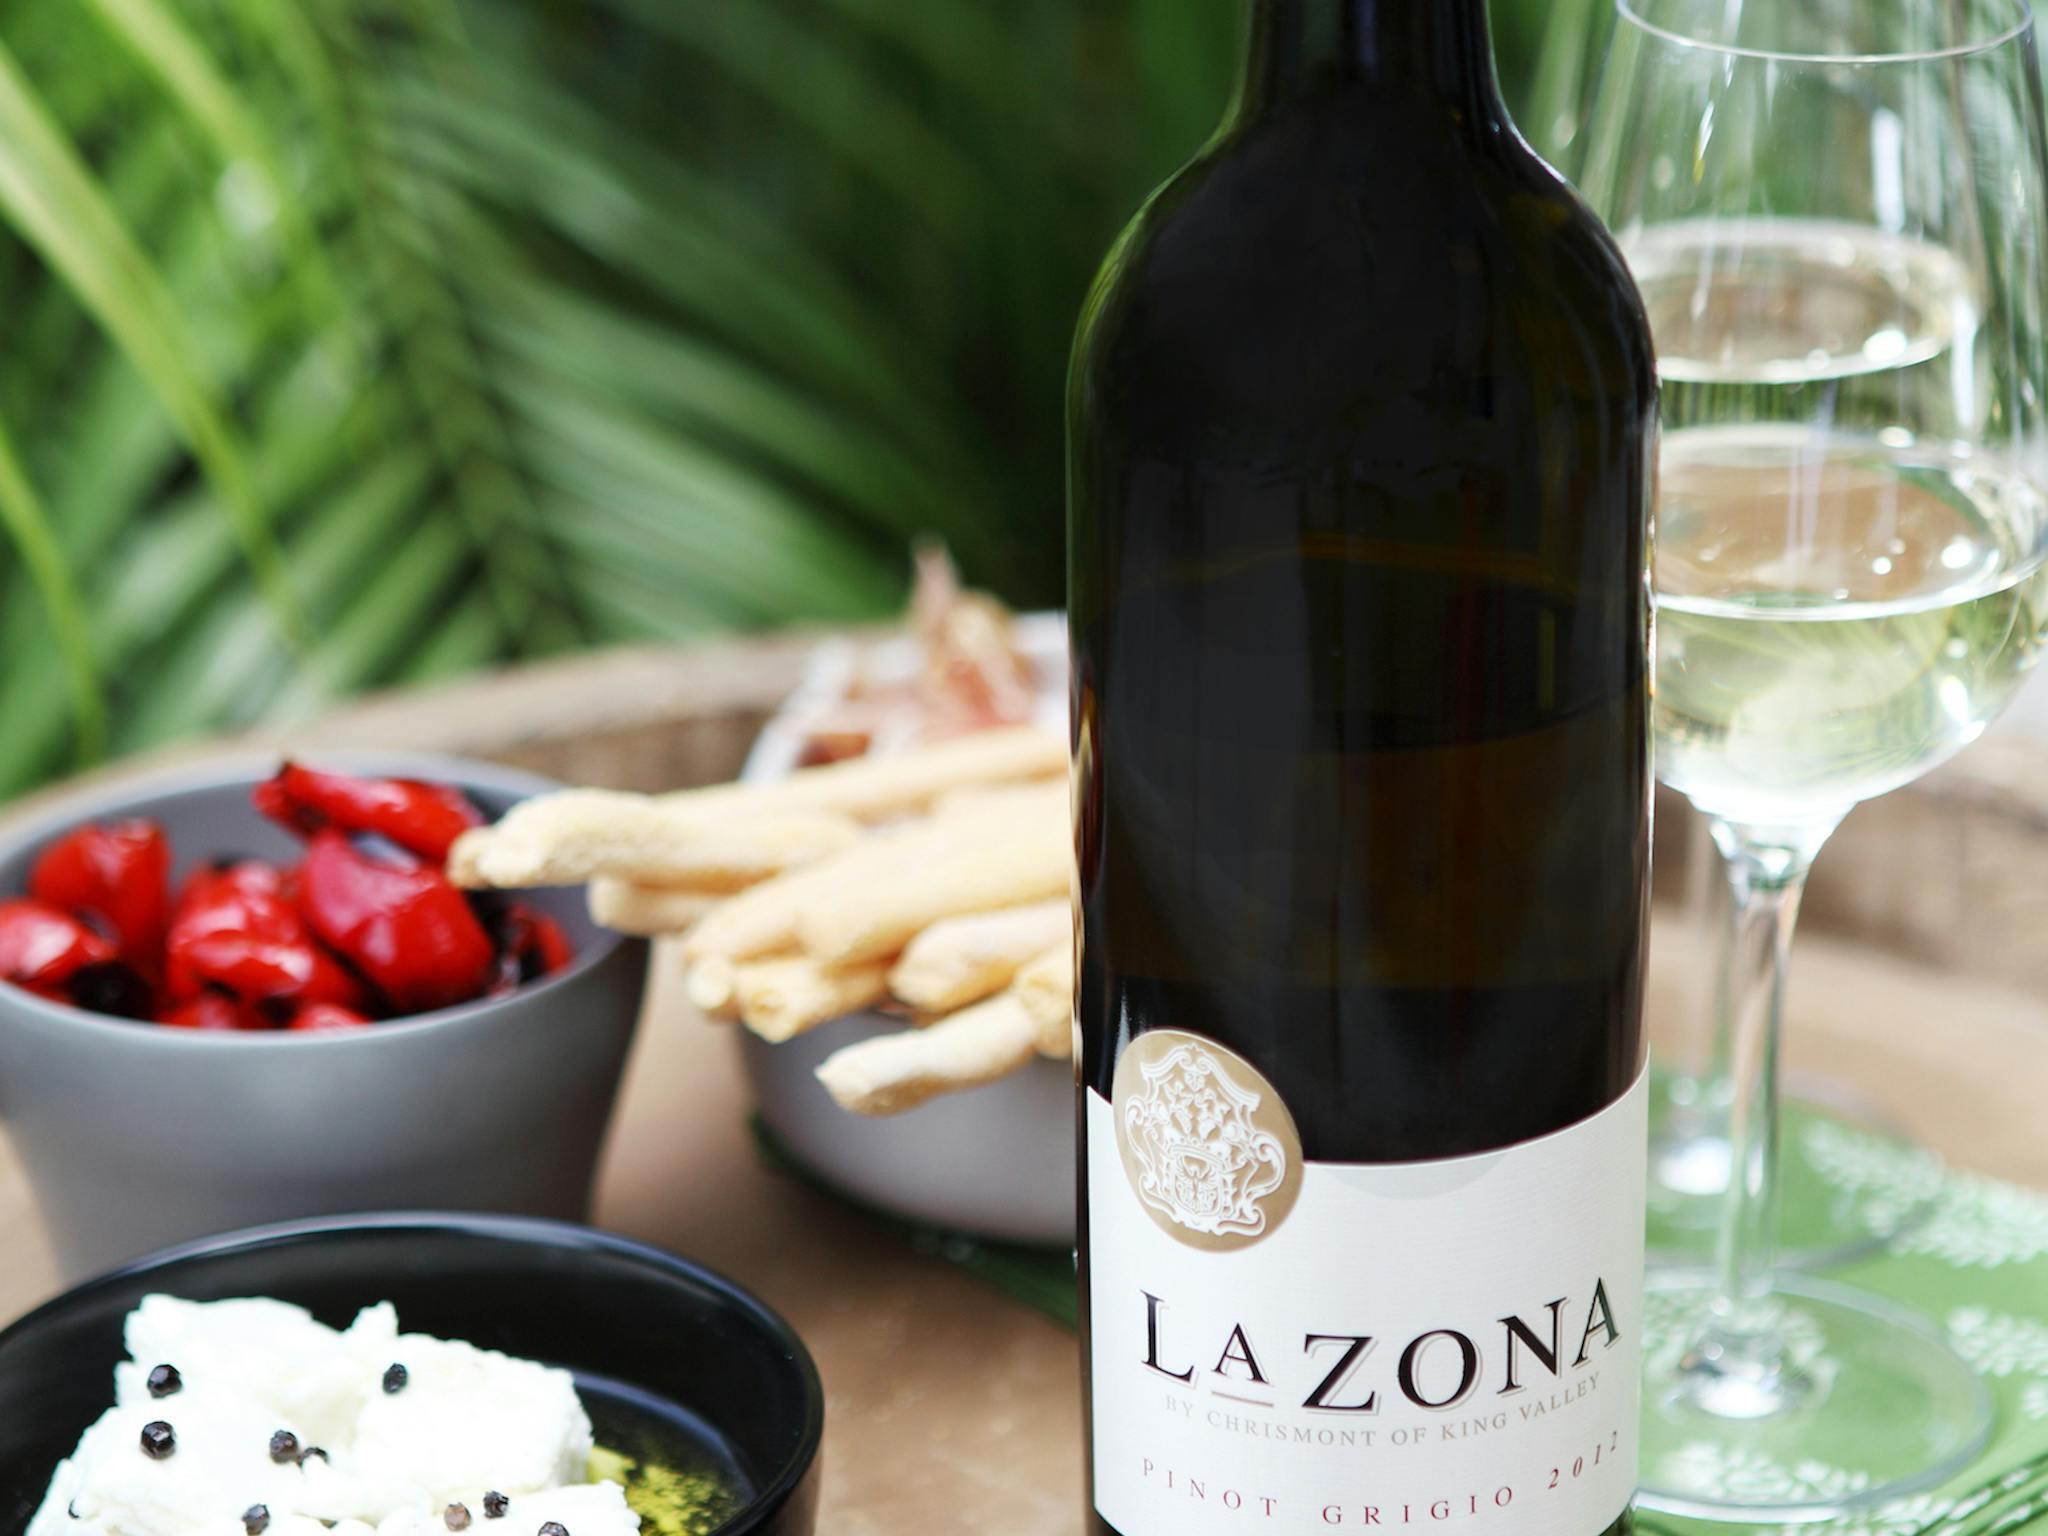 Enjoy delicious antipasti on your own private deck overlooking the vines